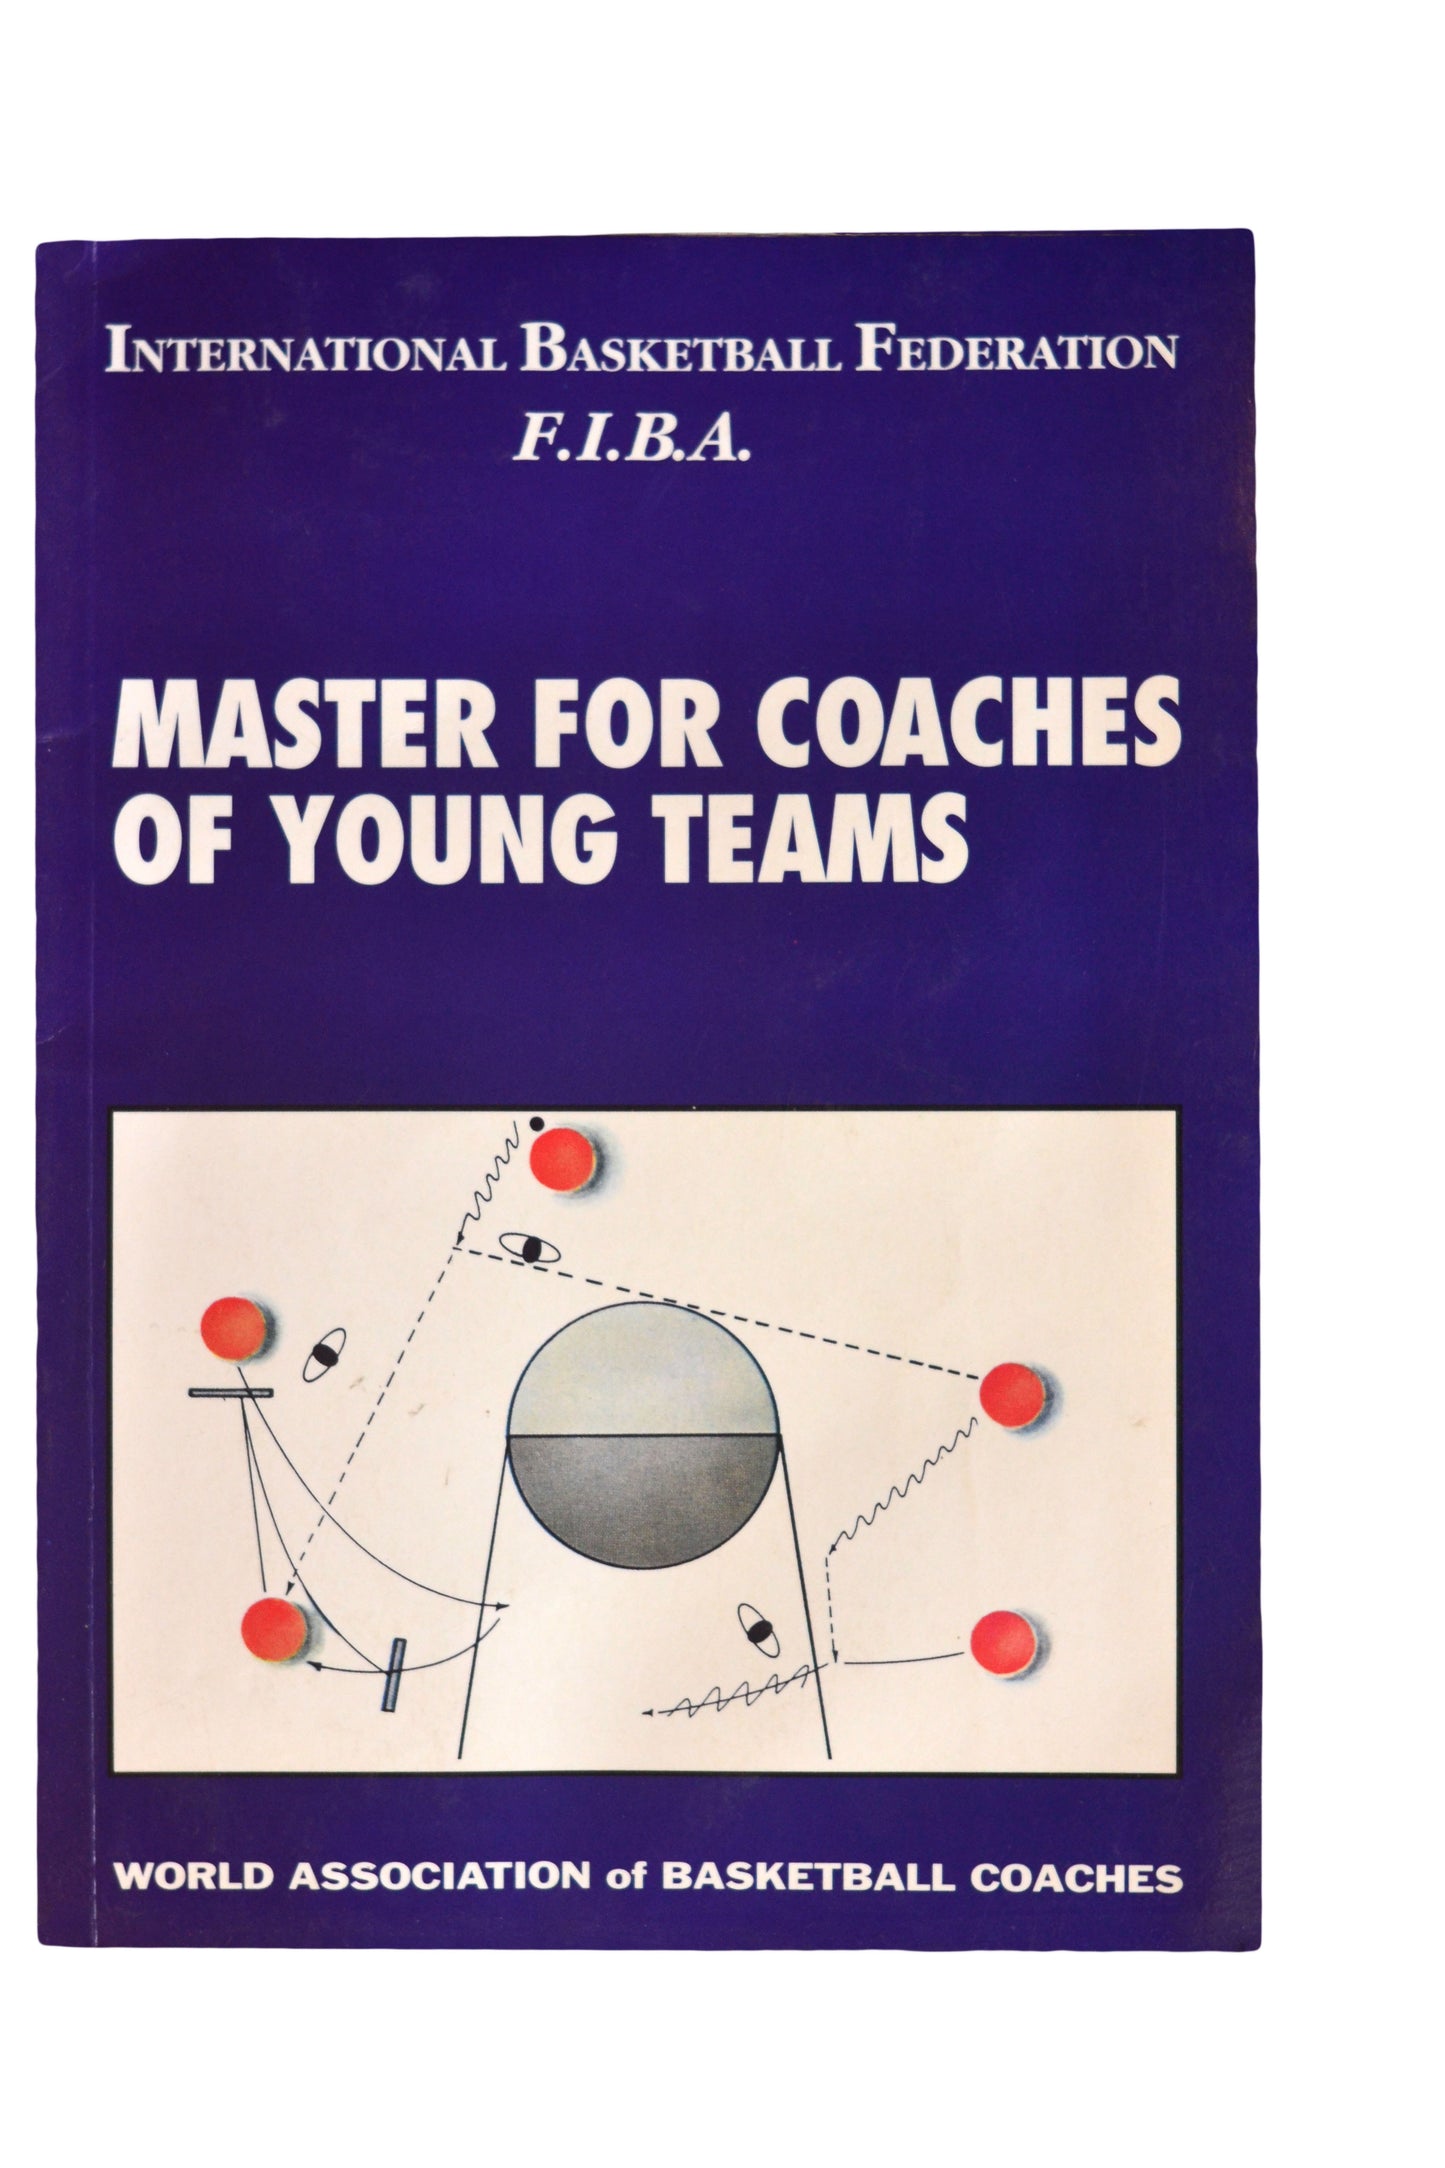 MASTER FOR COACHES OF YOUNG TEAMS